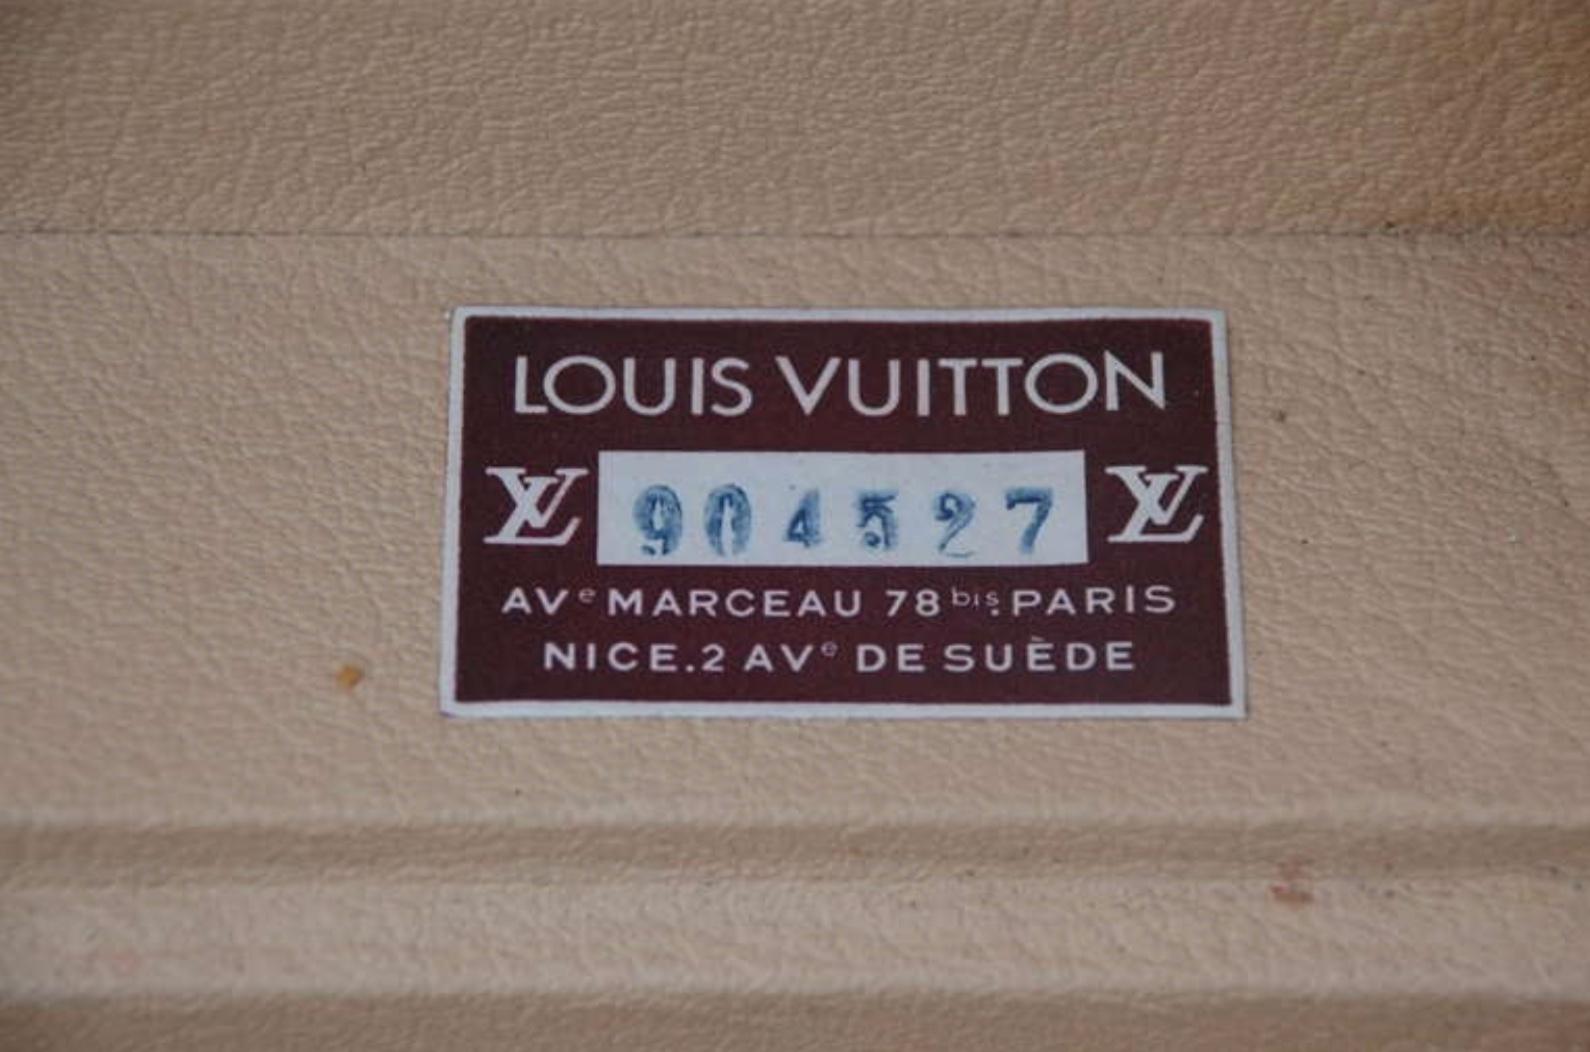 French Pair of Authentic Louis Vuitton Luggage Pieces For Sale